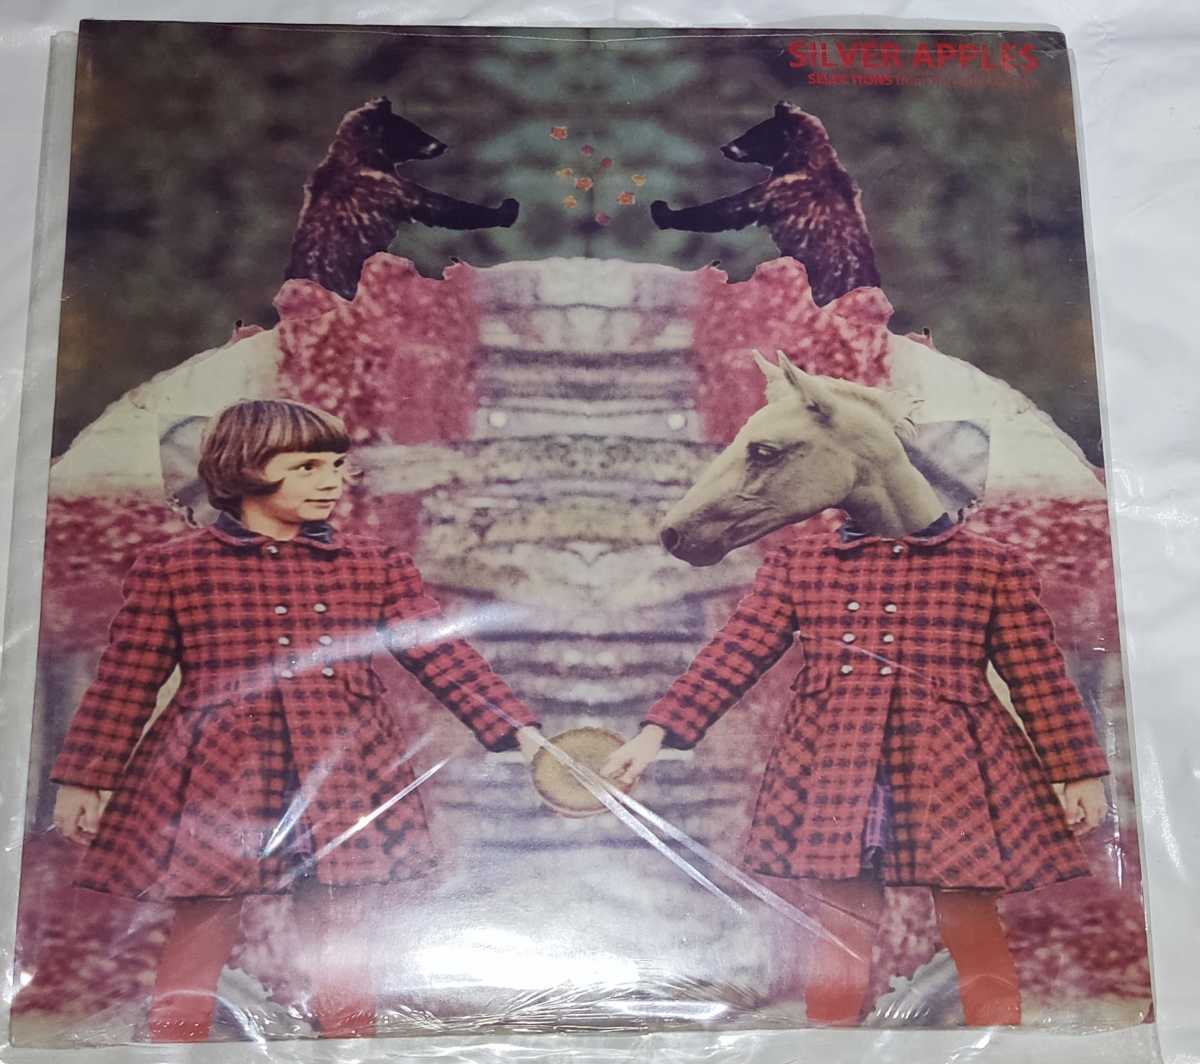 SILVER APPLES シルヴァー・アップルズ / SELECTIONS FROM THE EARLY SESSIONS 新品未使用 LP_画像1